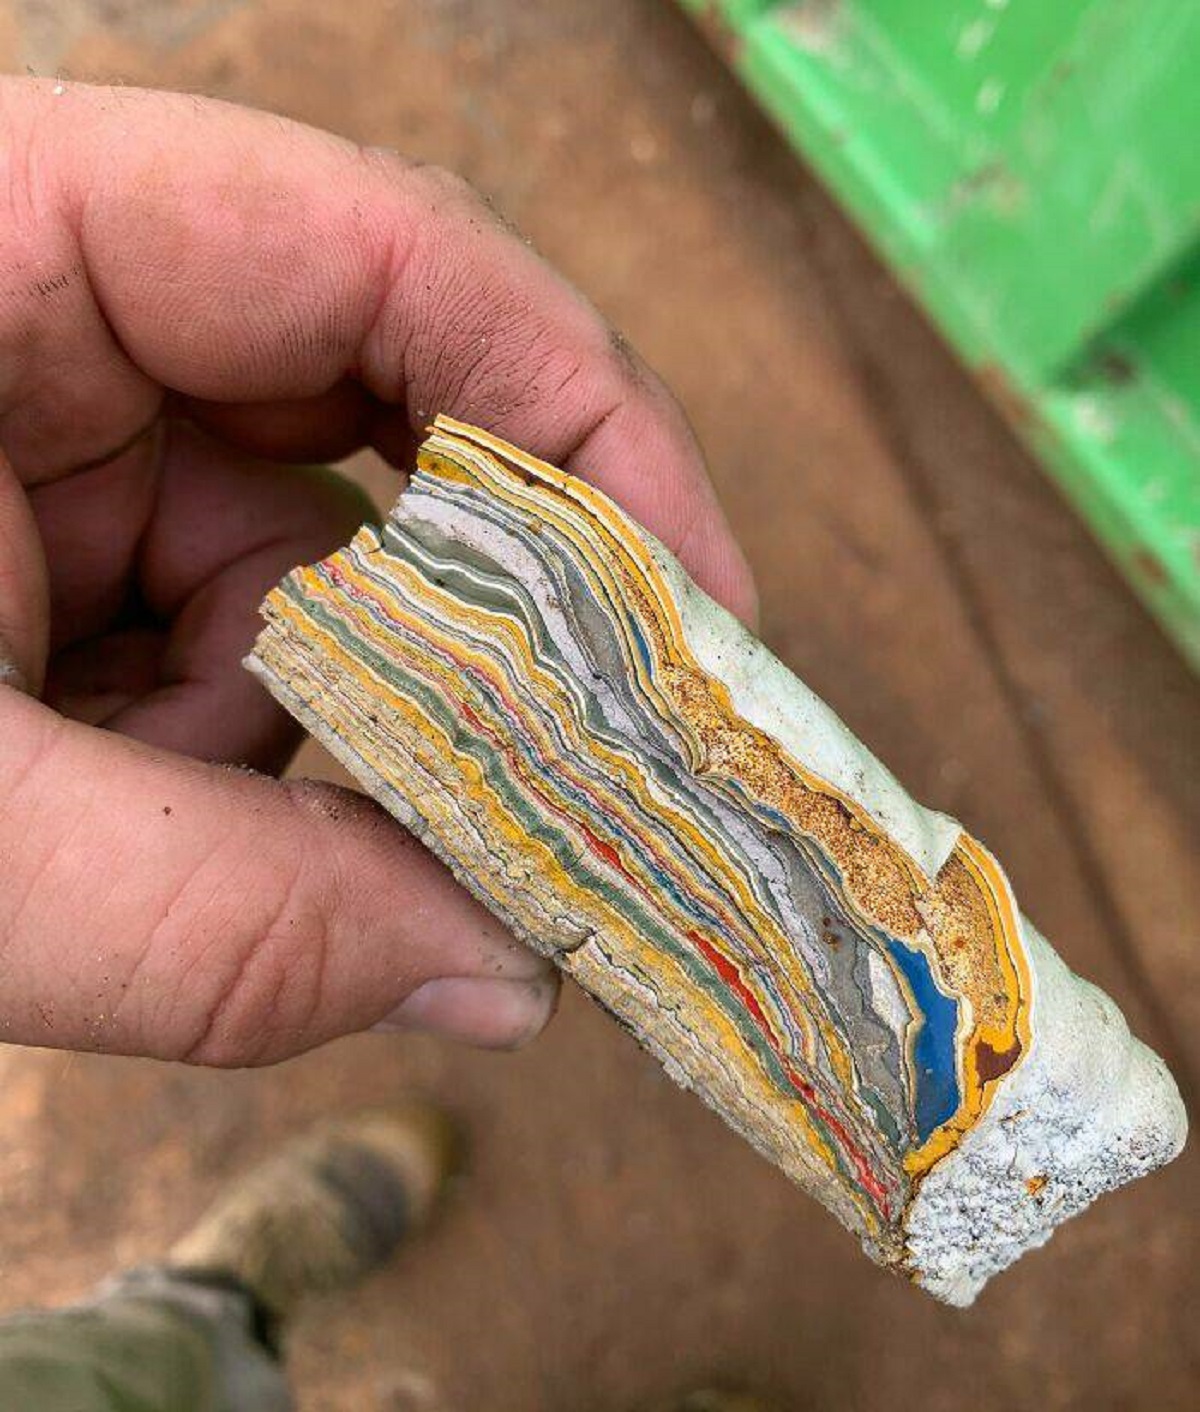 "Years Of Paint Build-Up I Chipped Of An Old Trestle At Work"